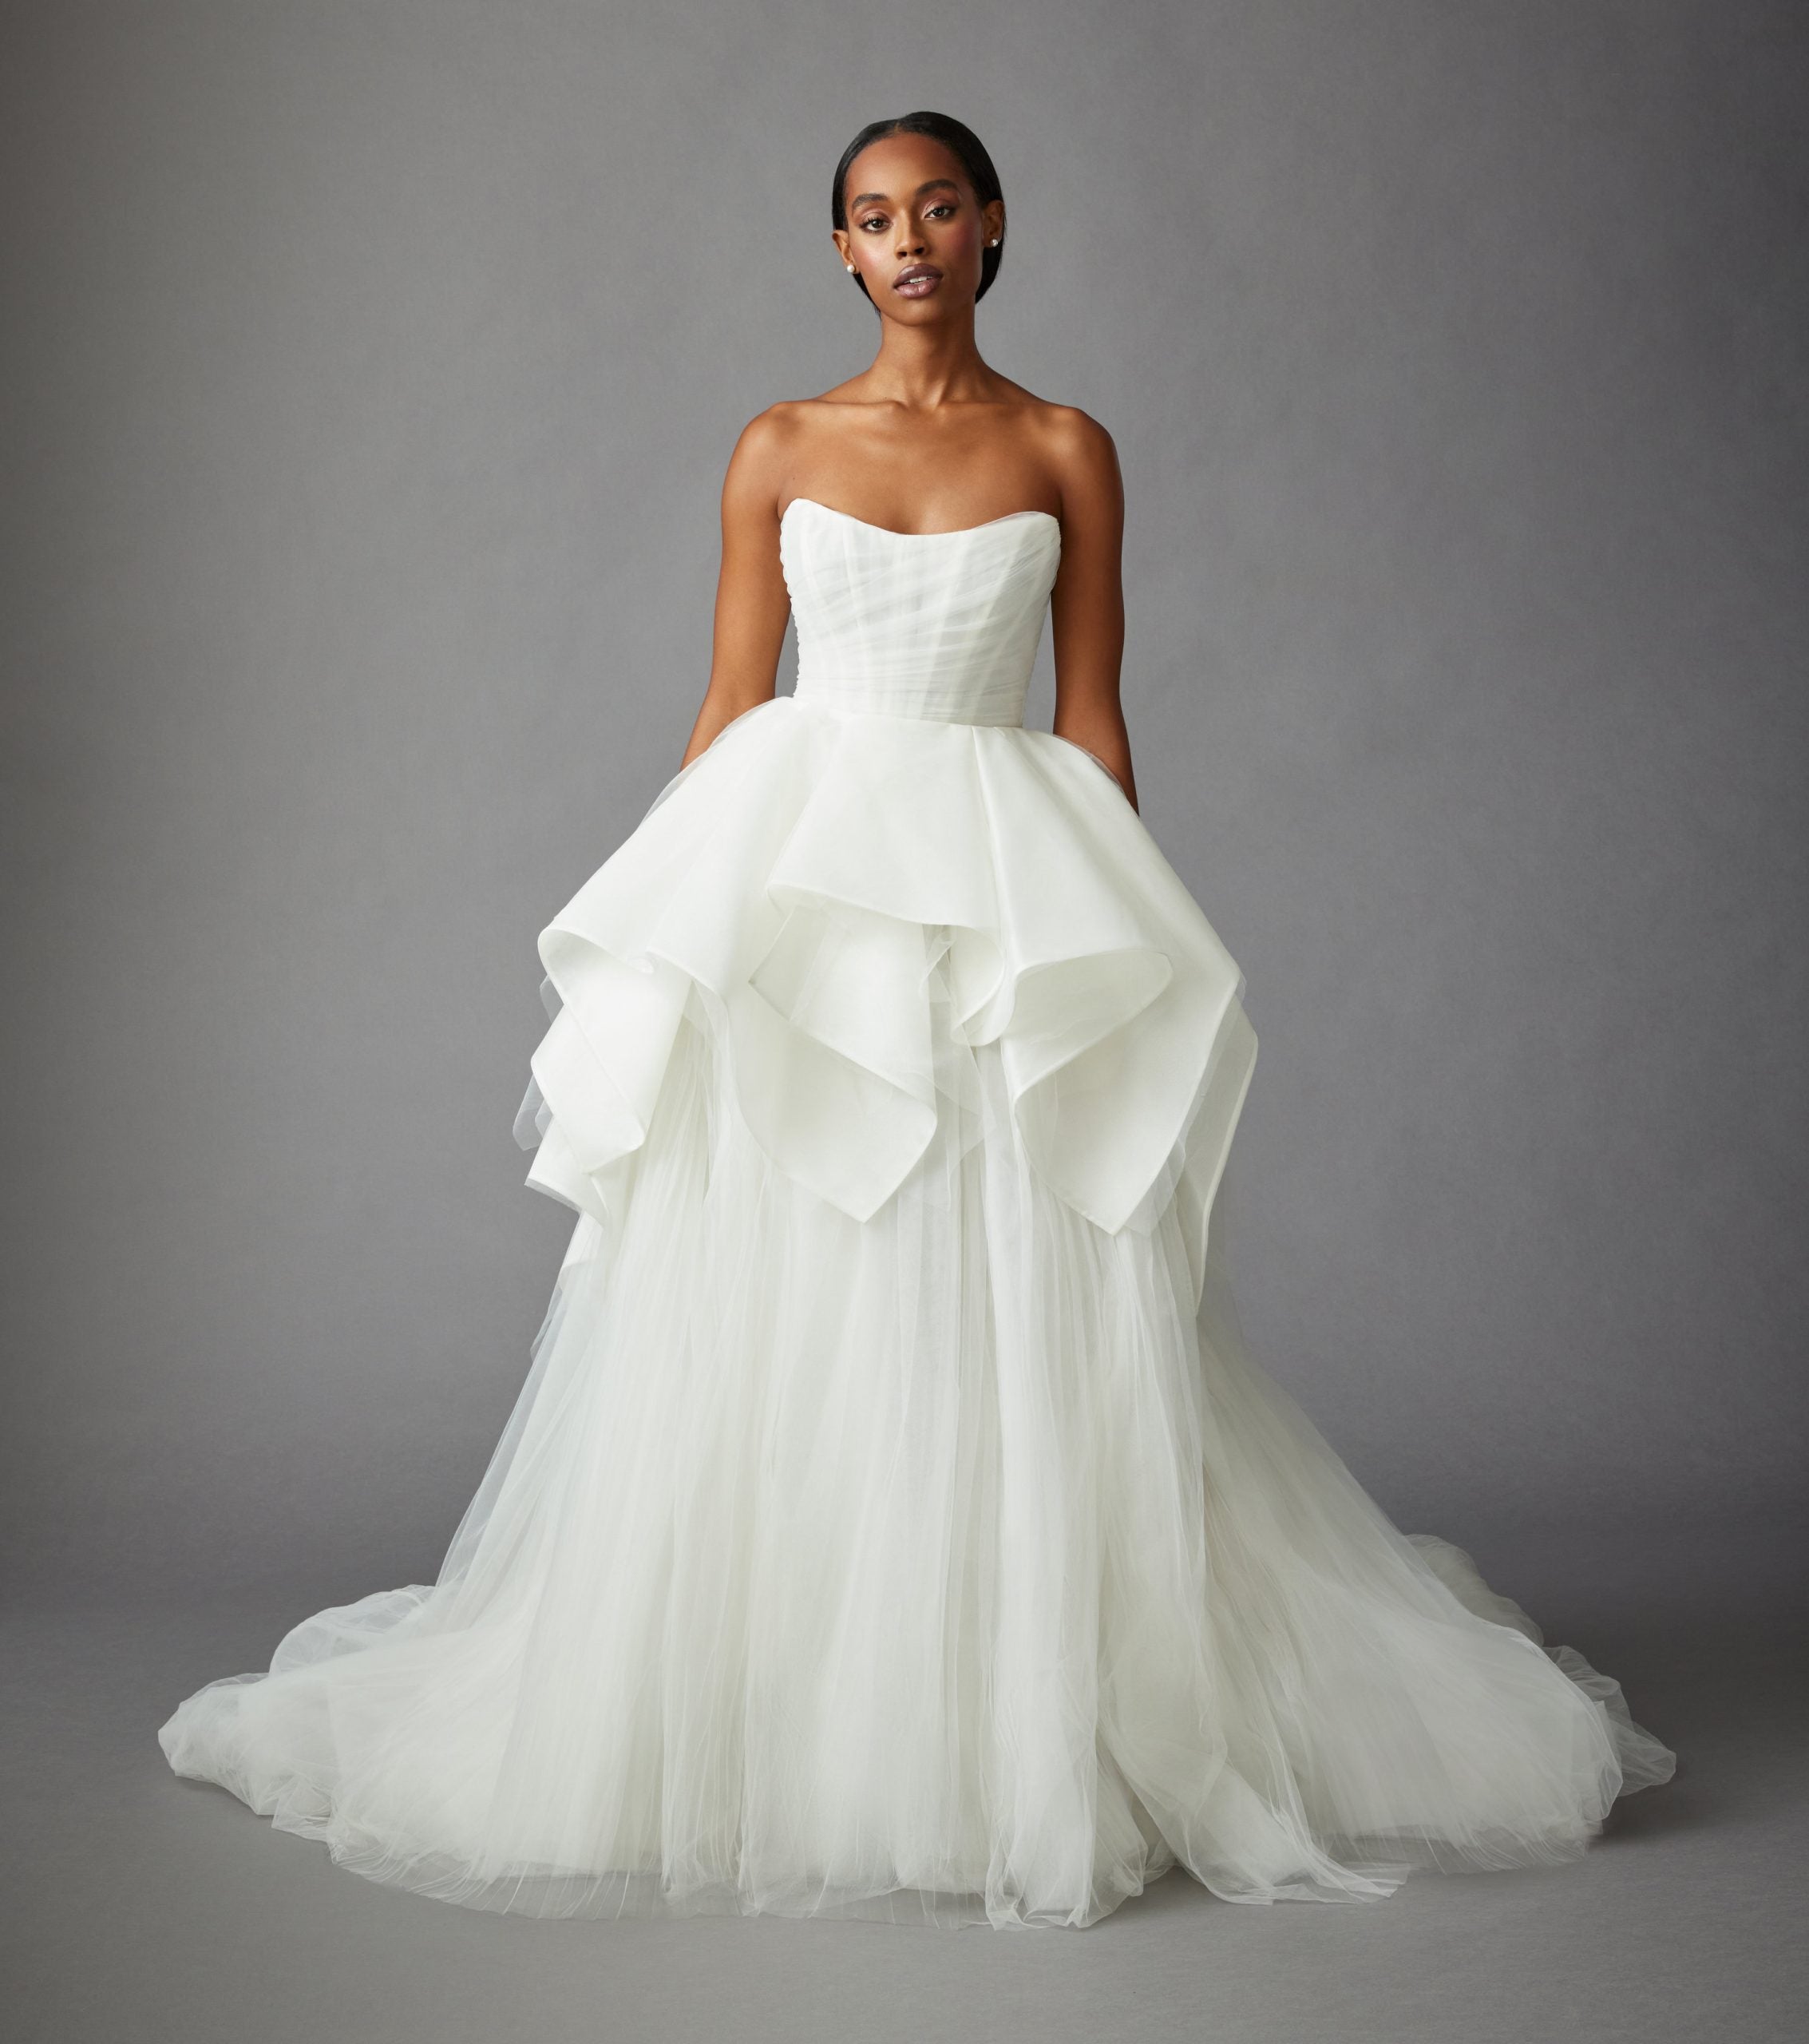 Strapless Ball Gown Wedding Dress With Corset Bodice by Allison Webb - Image 1